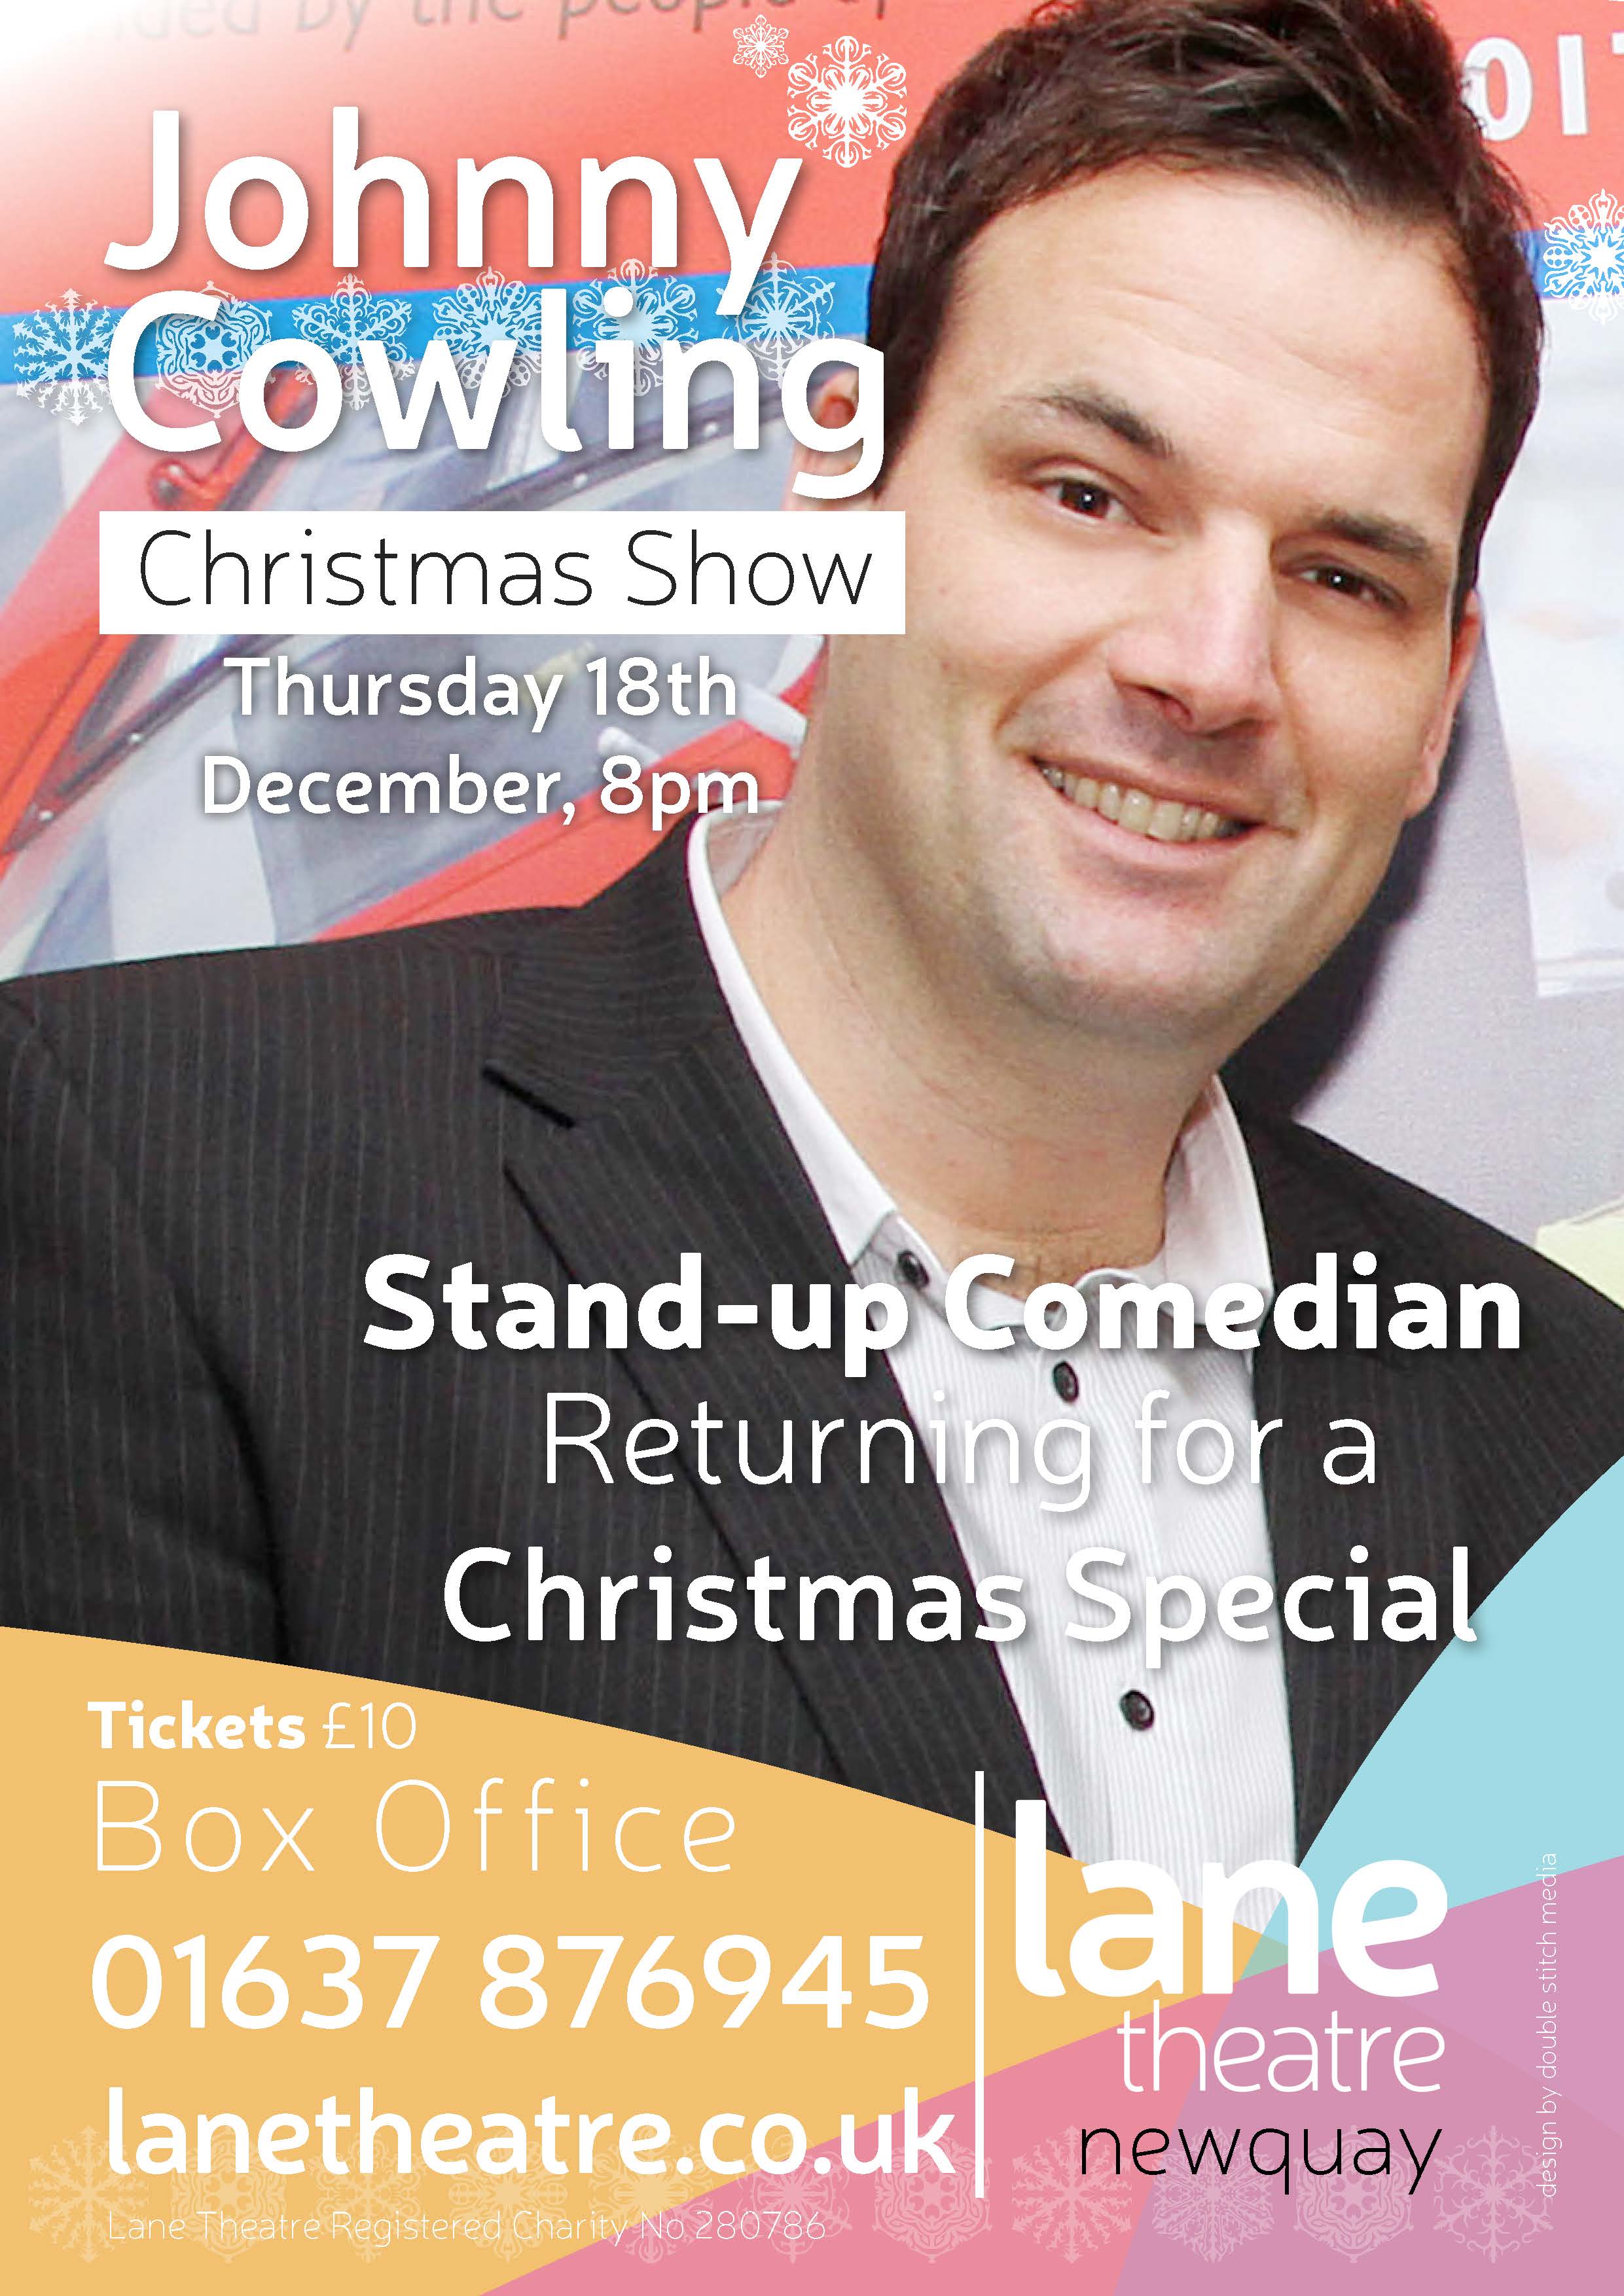 Johnny's back with a Christmas Spectacular at Lane